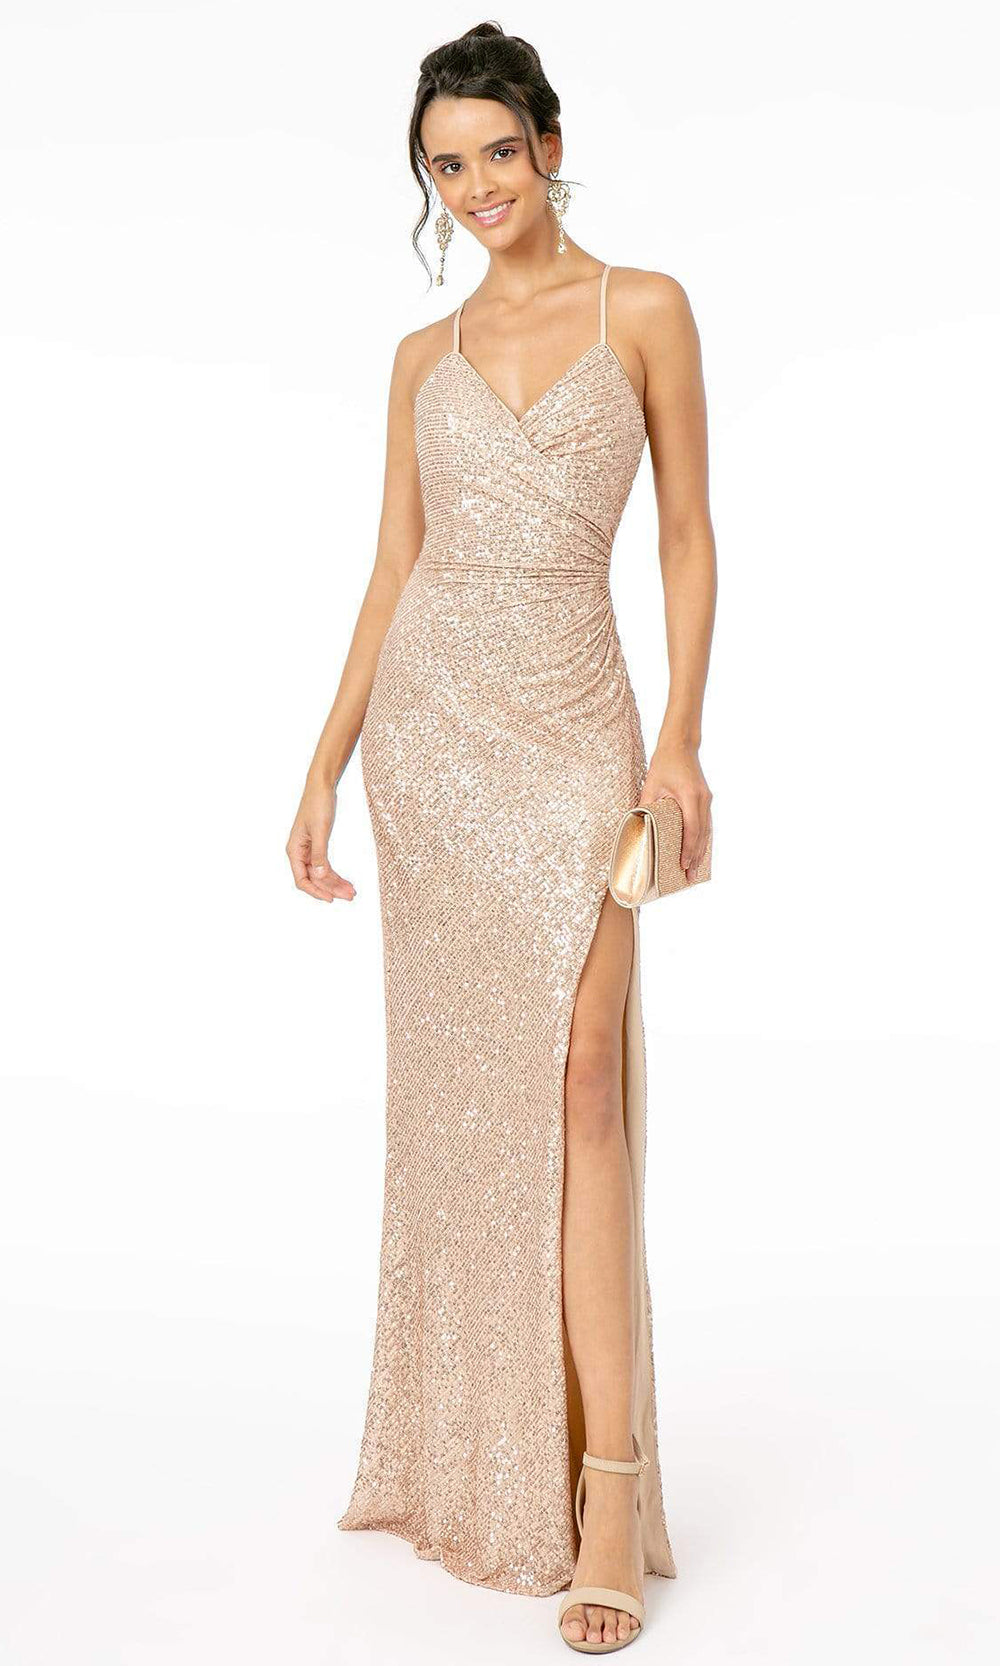 Elizabeth K - Sequined Spaghetti Strap Dress GL2918SC In Pink and Gold